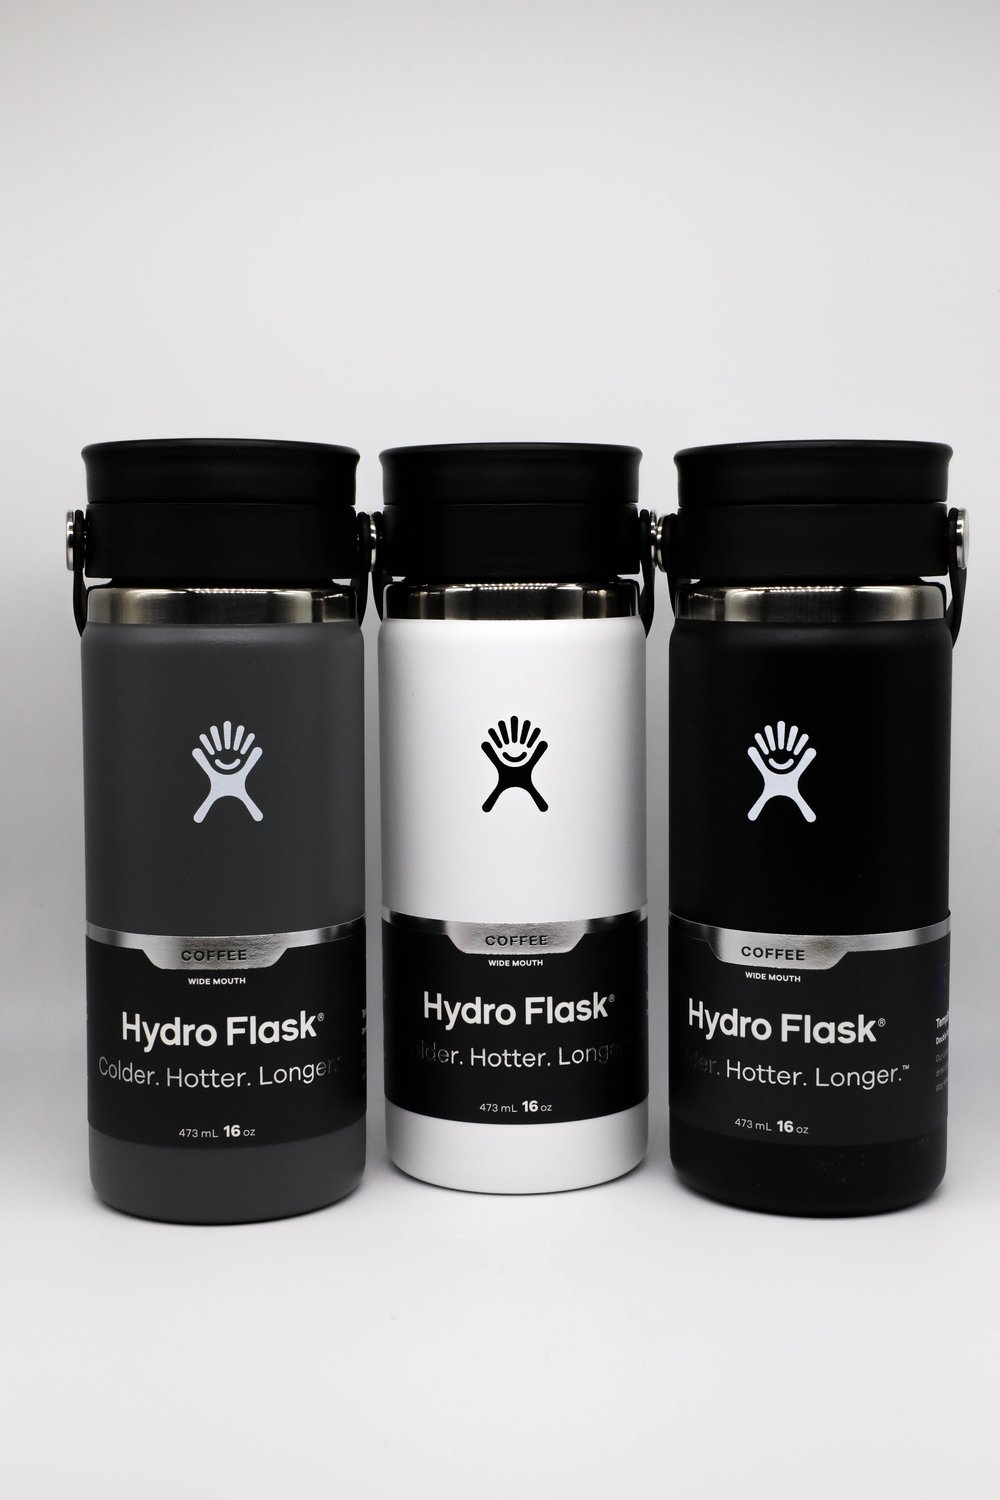 Hydro Flask - 16oz Wide Mouth Sip Lid - 9 Colors Available